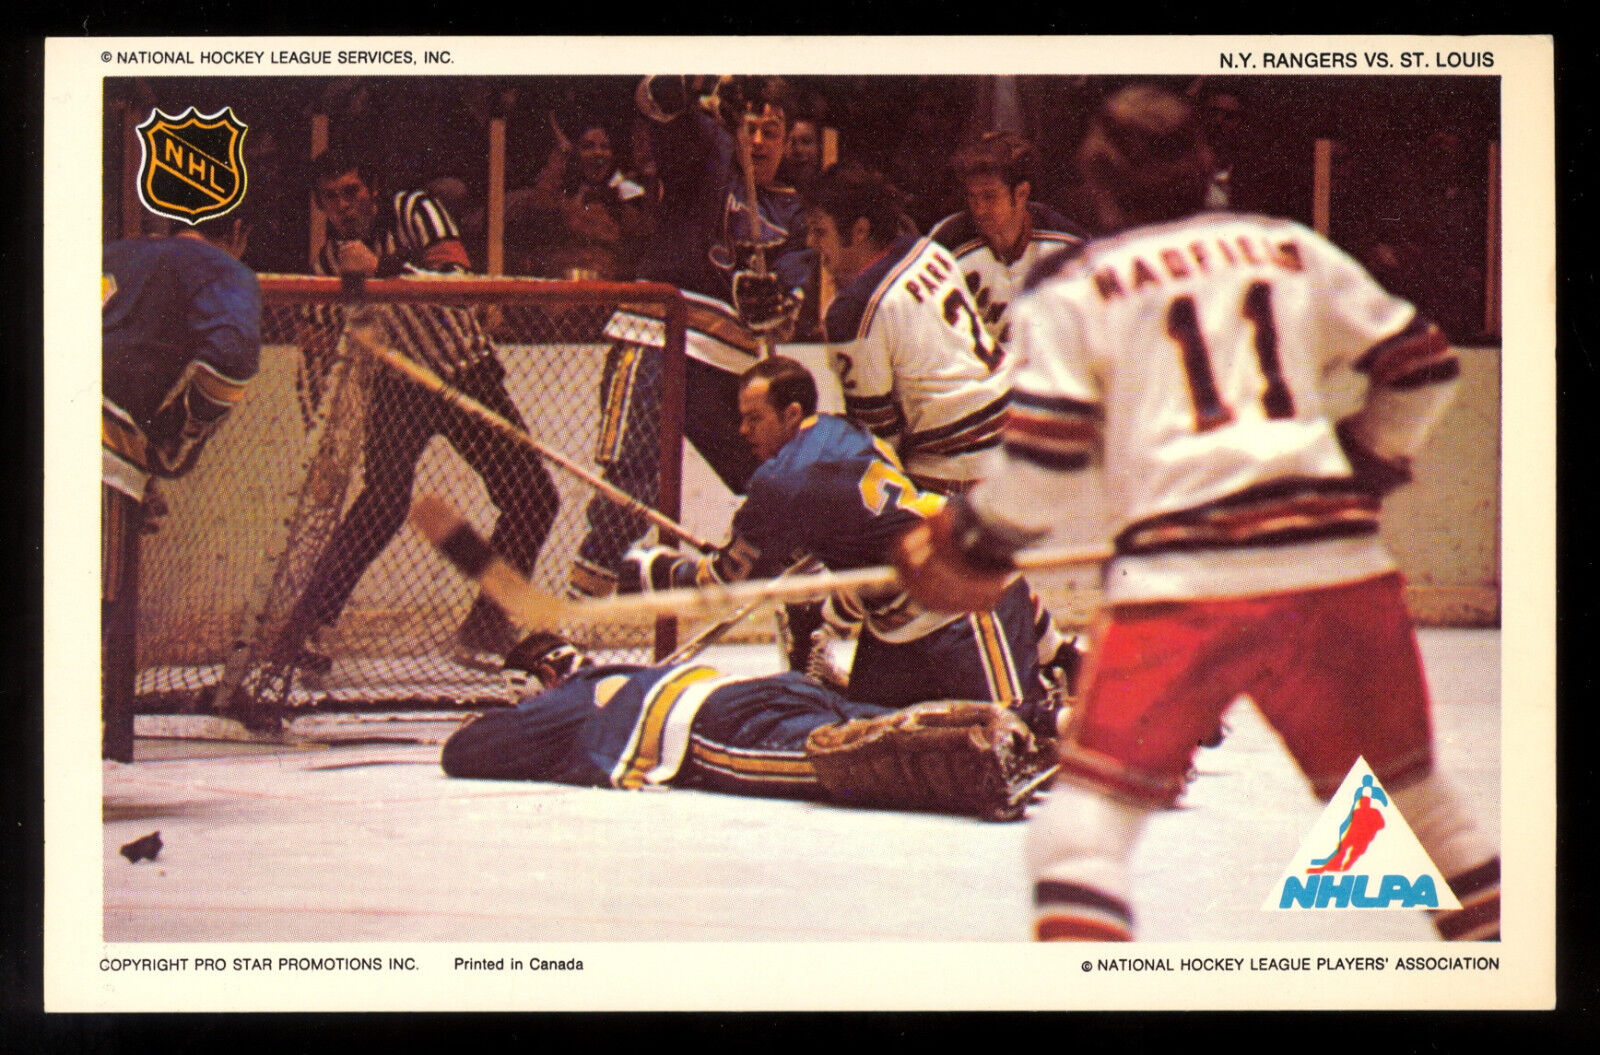 1971-72 NHLPA PRO STAR PROMOTIONS Photo Poster painting PARK-HADFIELD-RATELLE Rangers v Blues NM